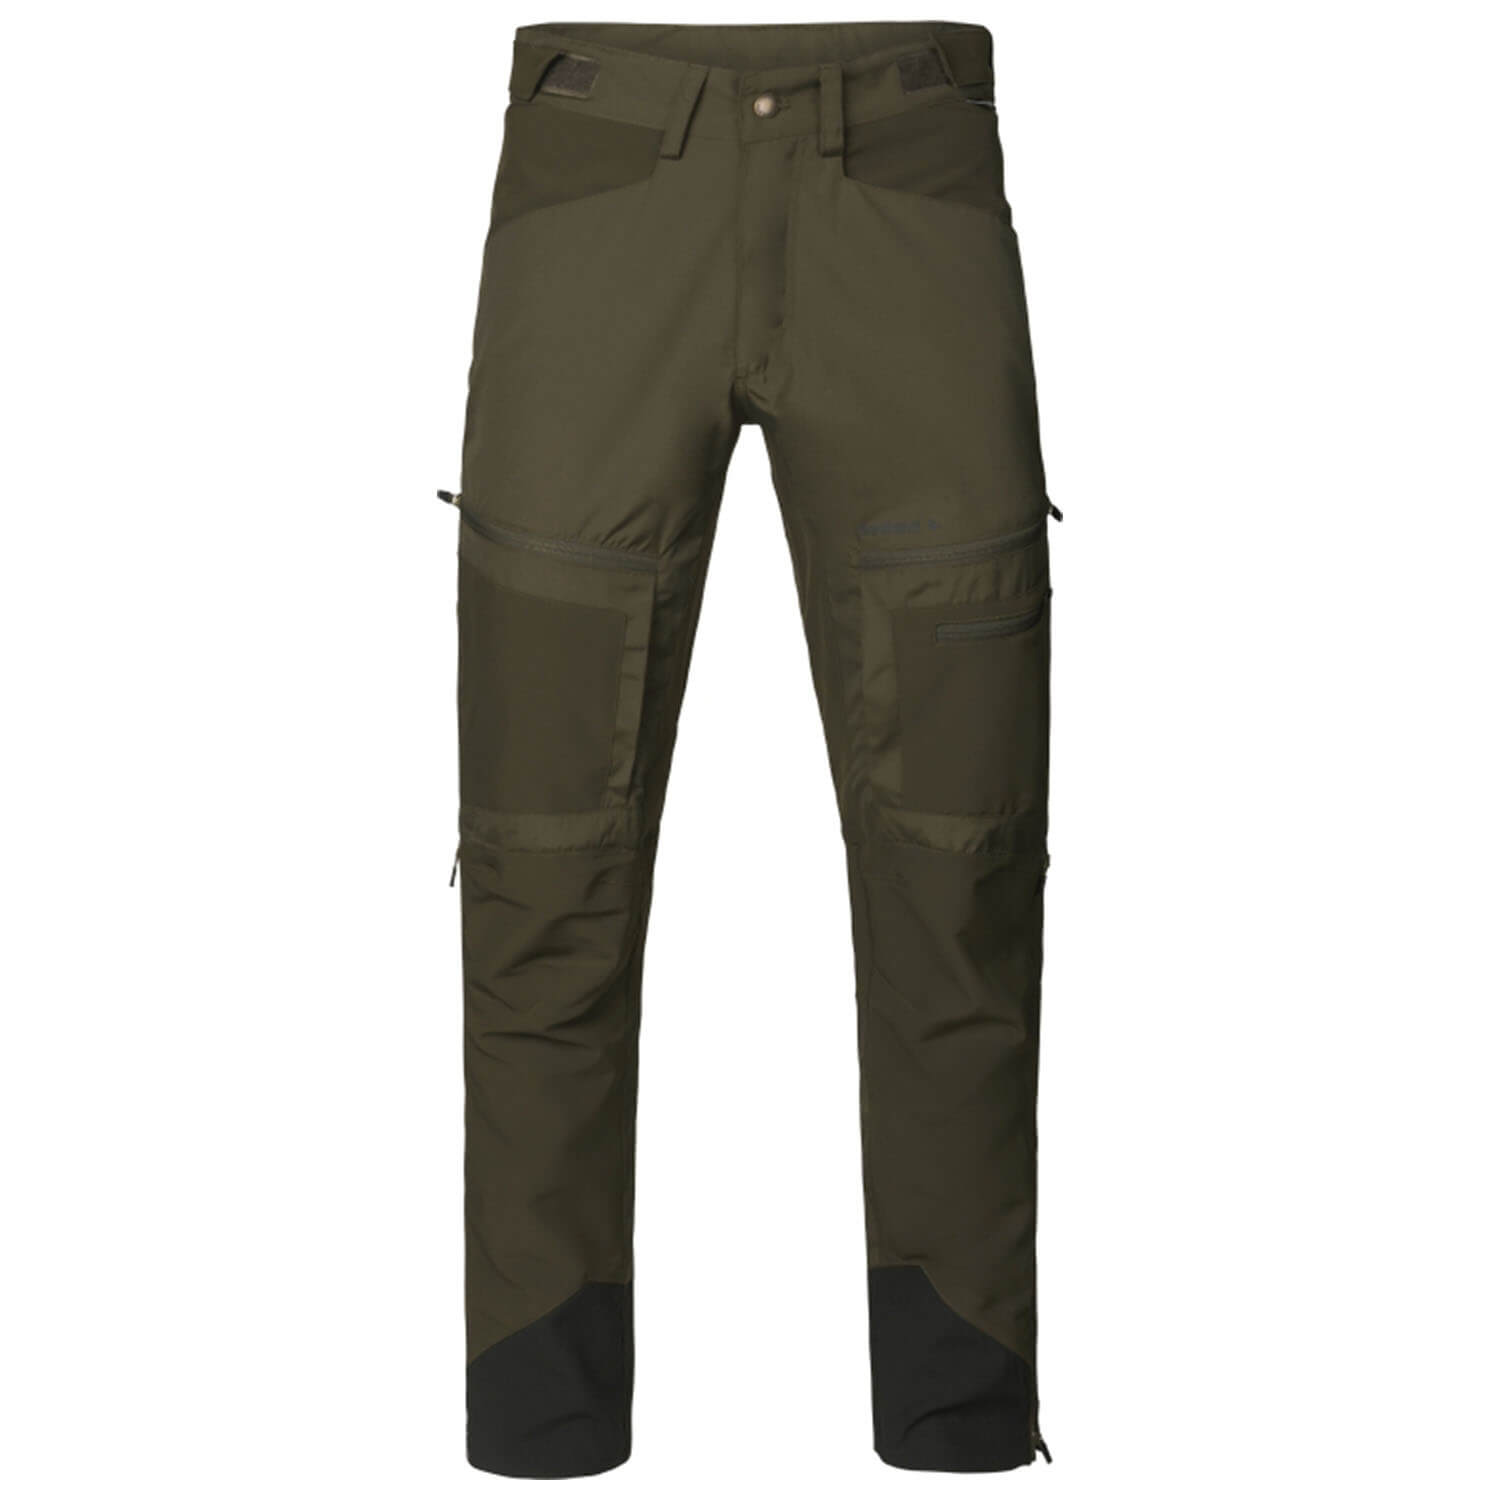 Seeland pants hemlock (Pine Green/Grizzly Brown) - New Arrivals